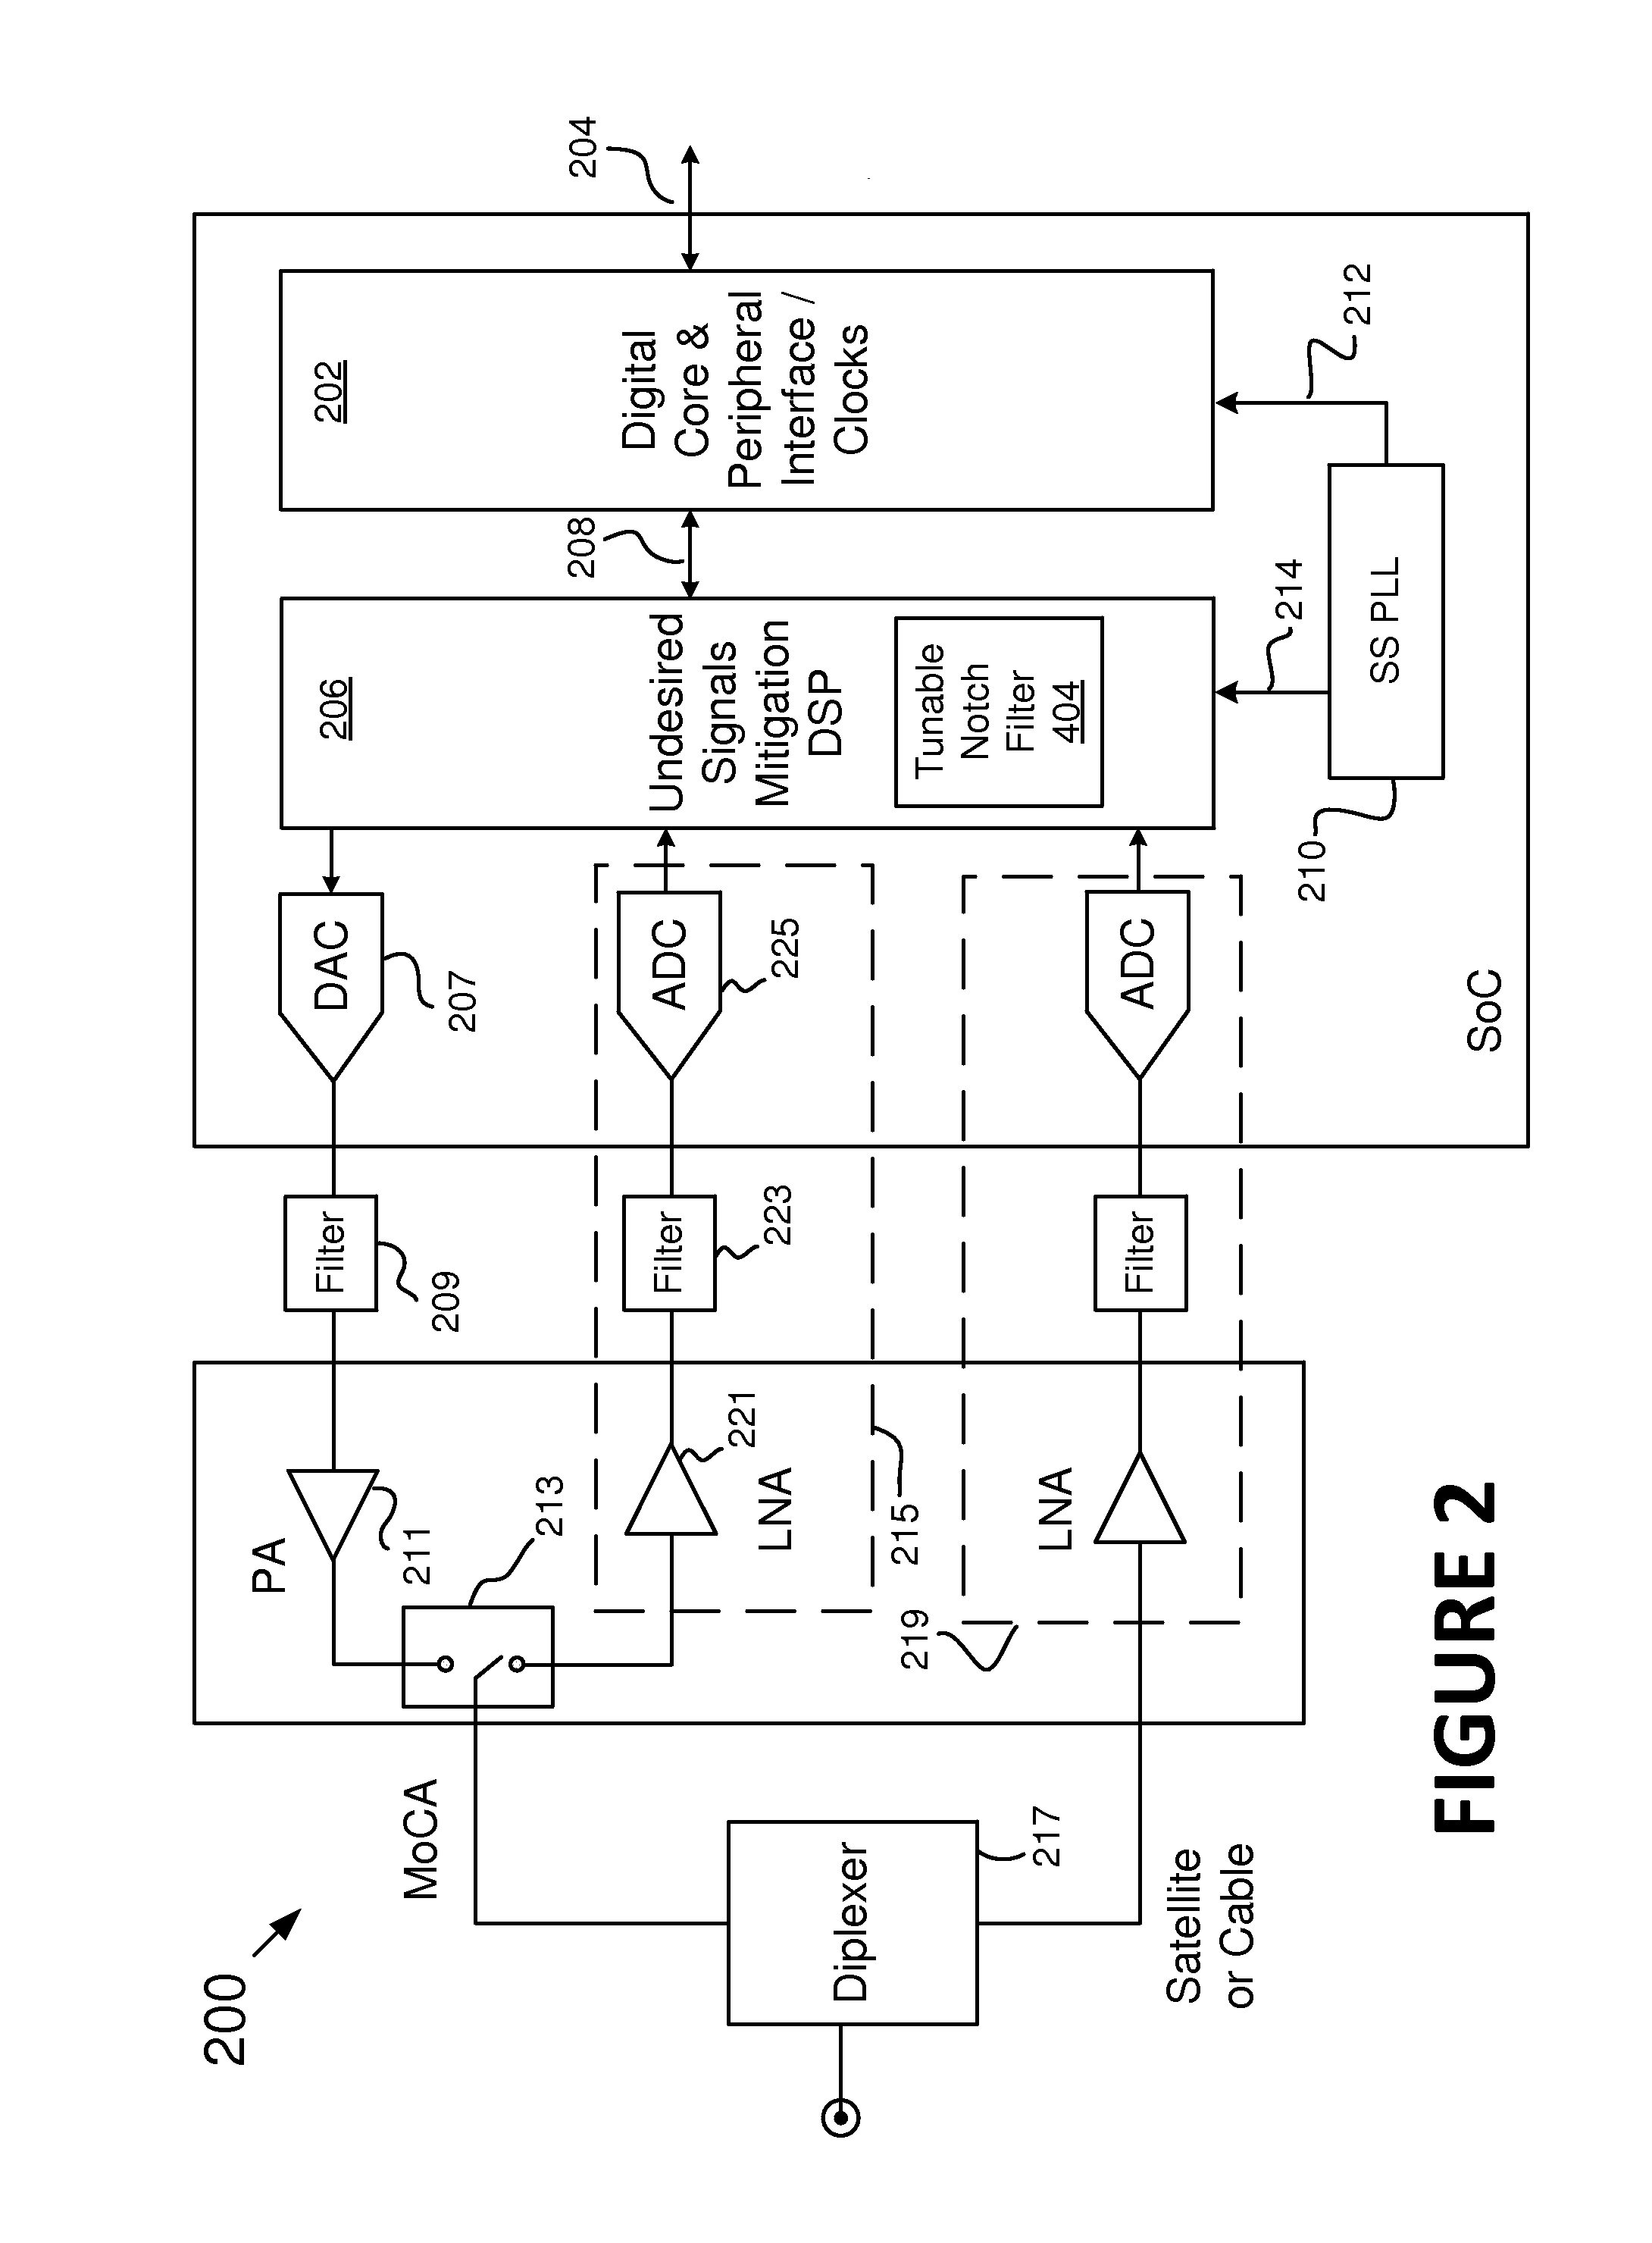 Method and apparatus for cancellation of interference from a spread spectrum phase lock loop